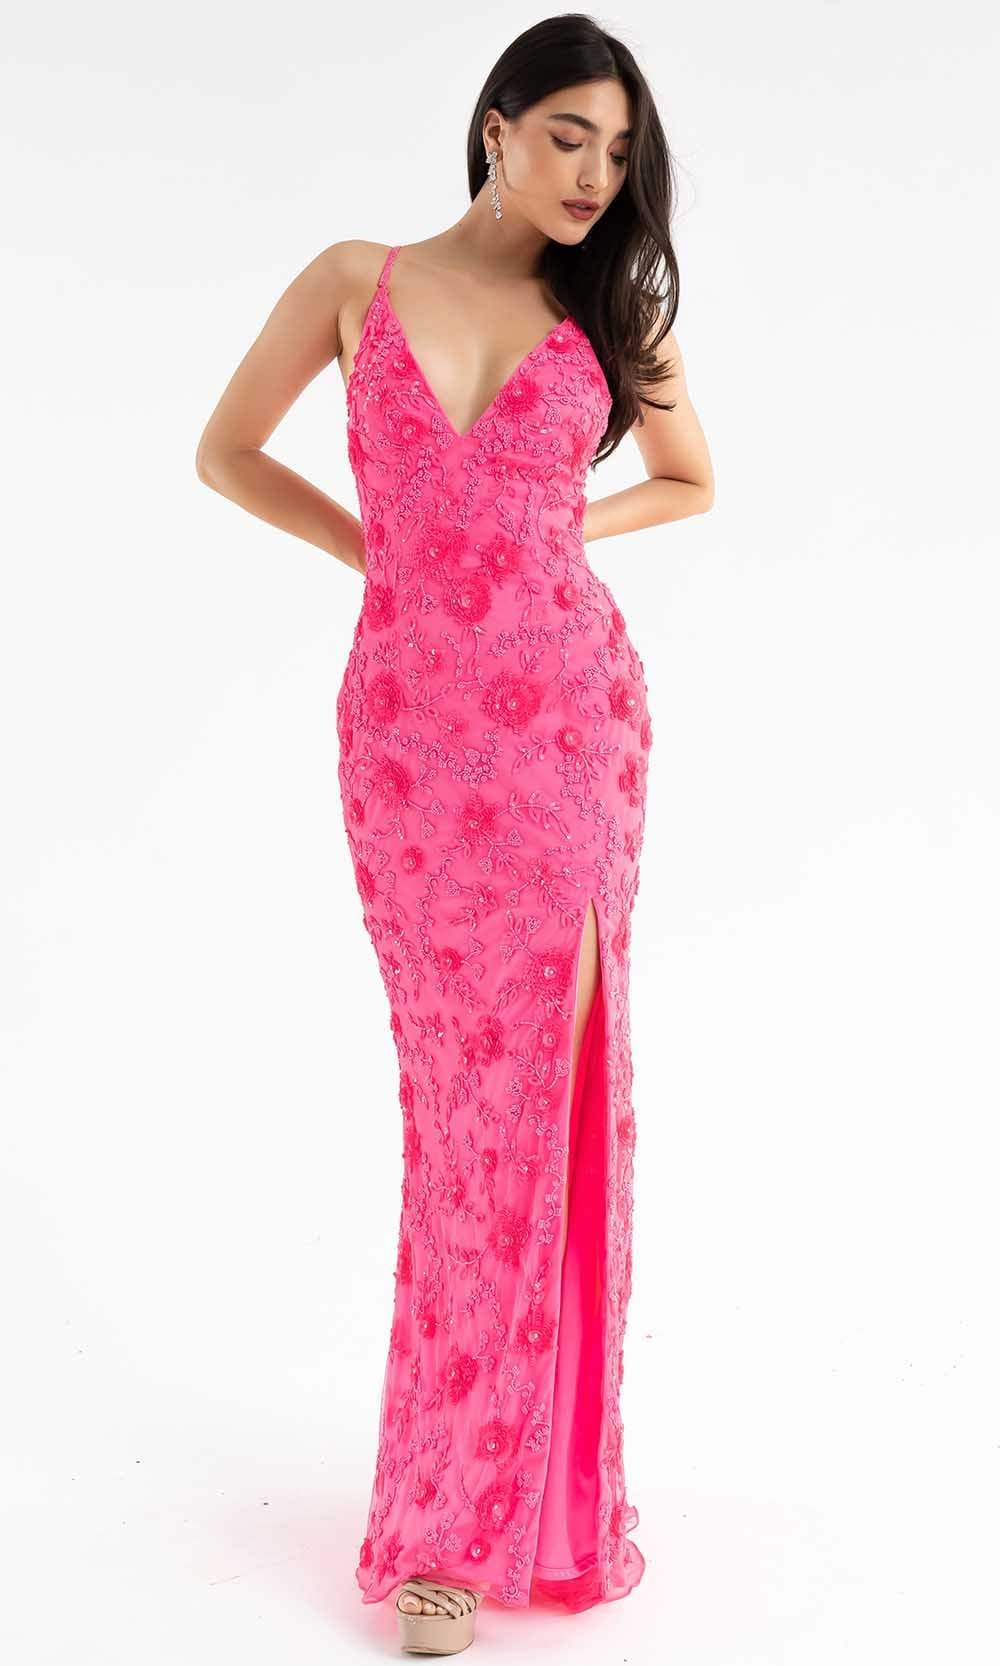 Primavera Couture - 3731 Sleeveless Plunging V-Neck Dress In Pink